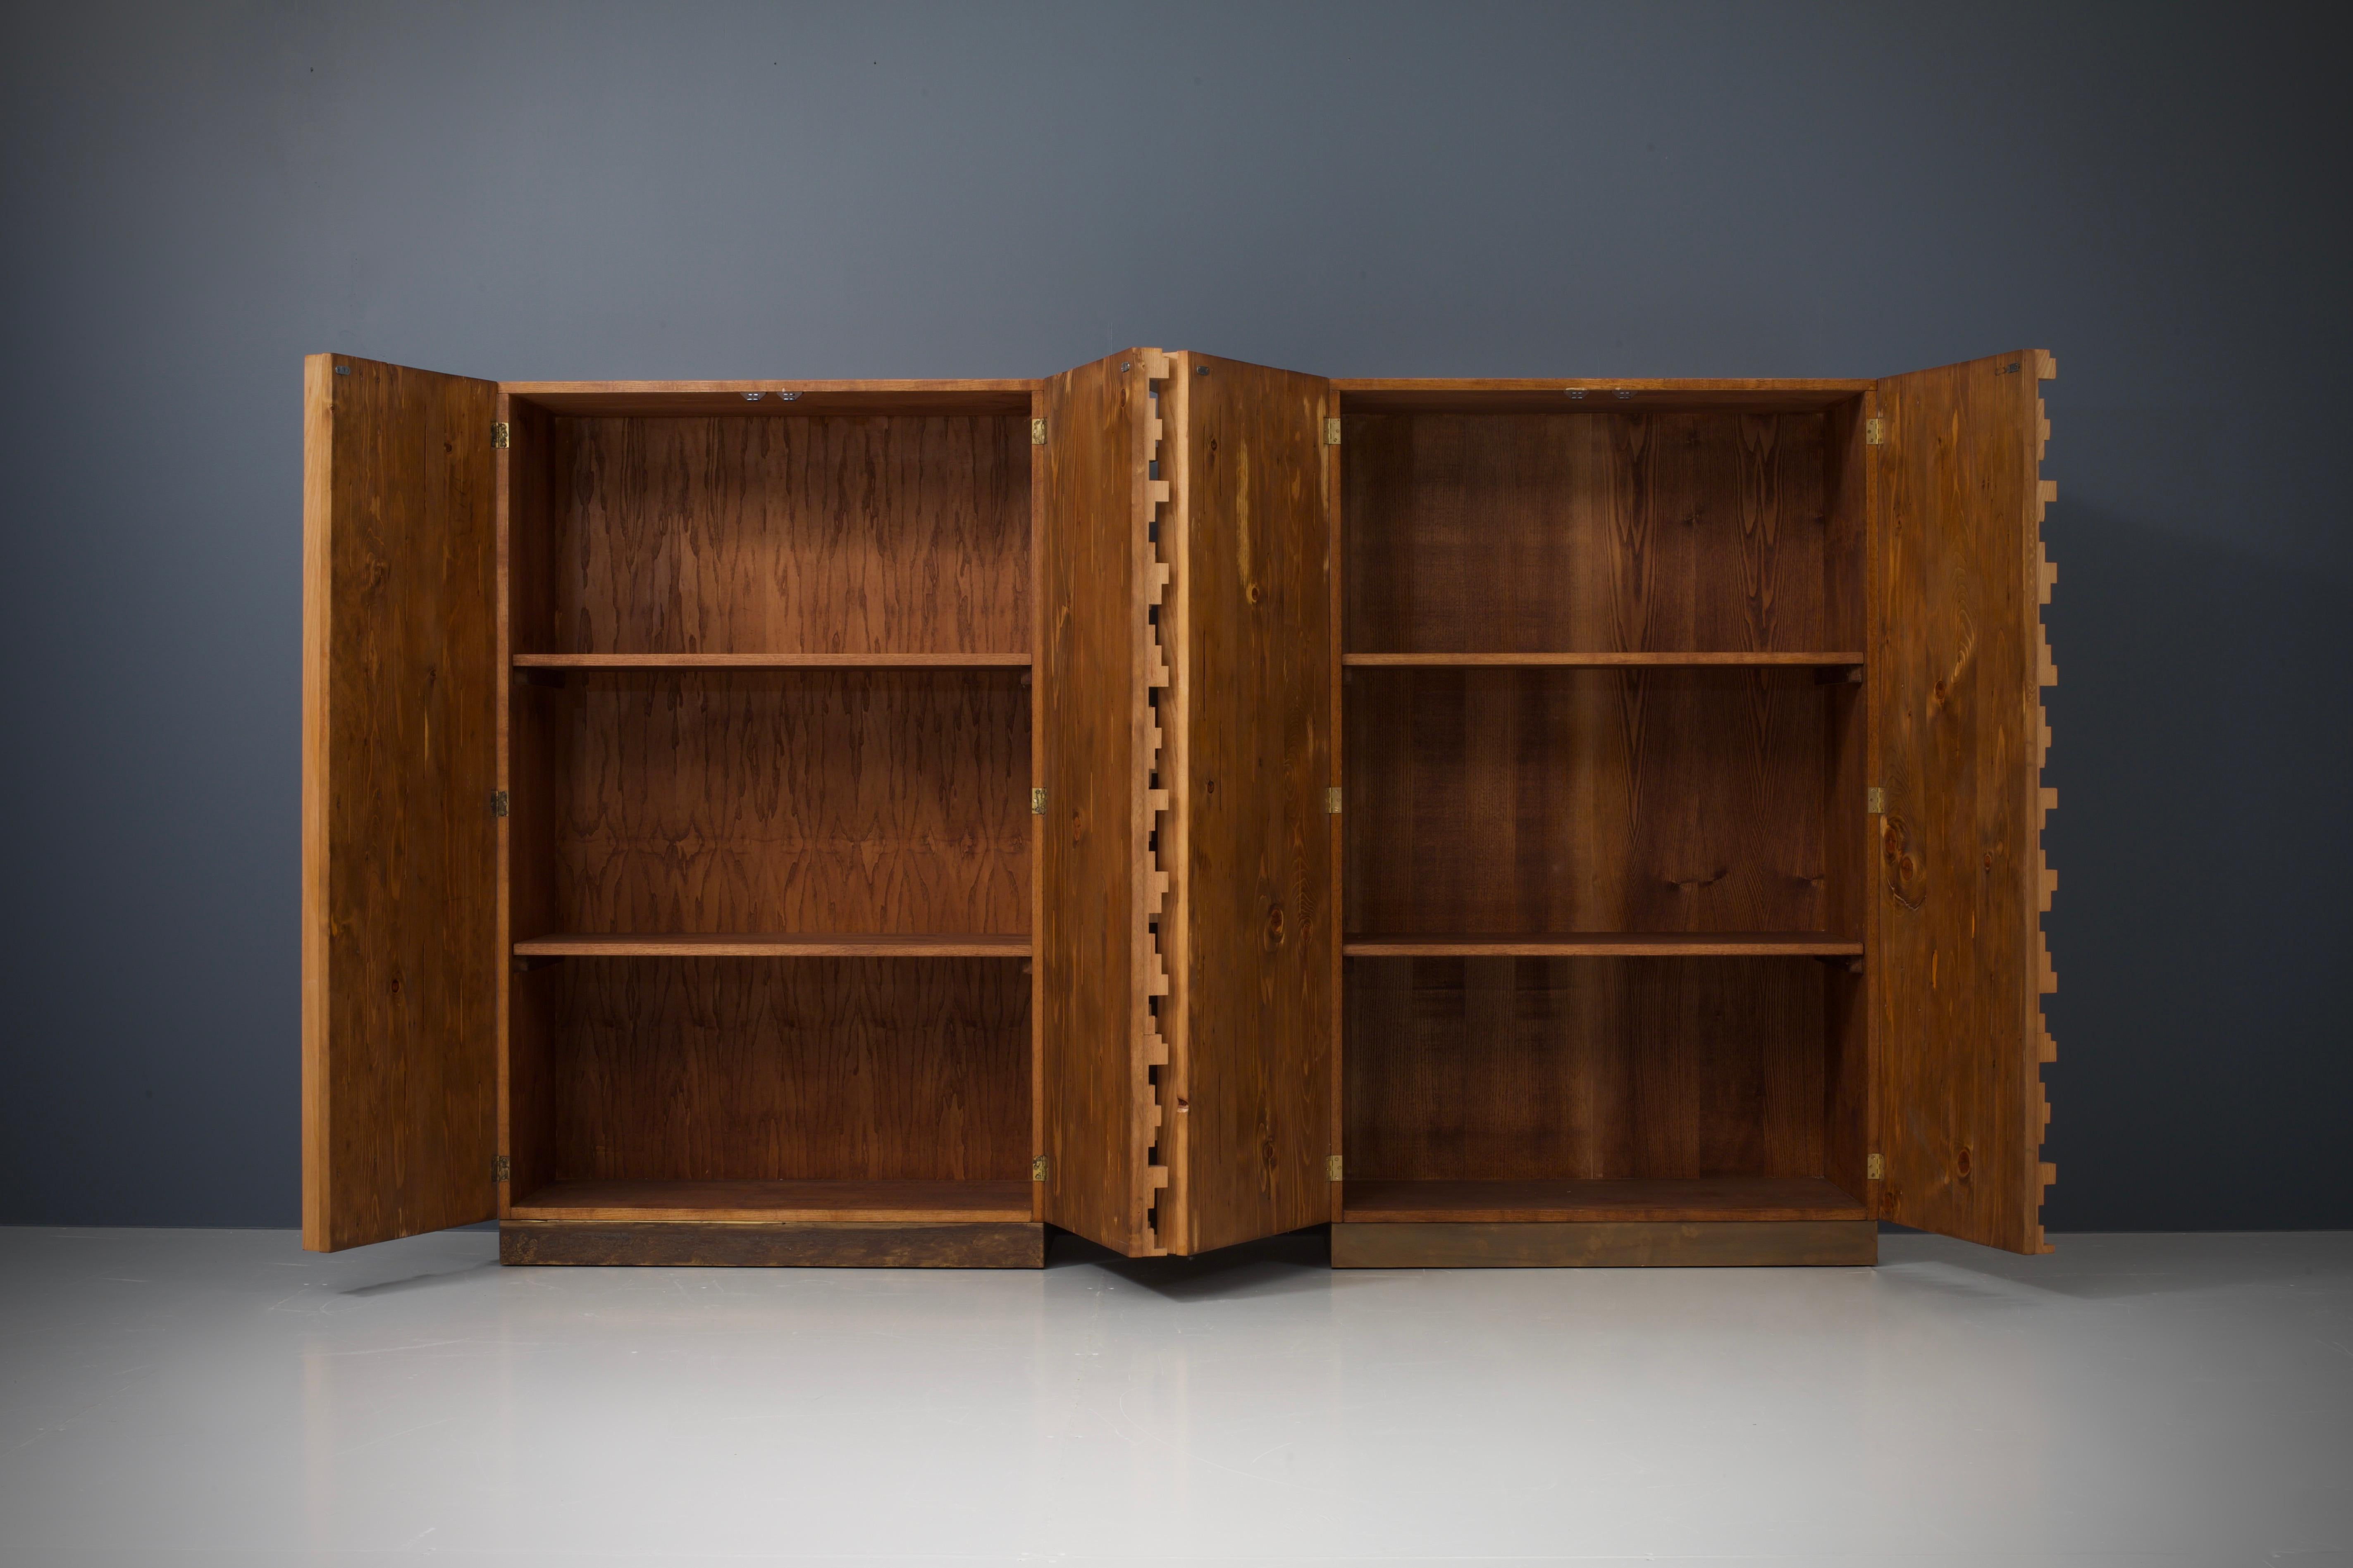 Set of 3 Wall Panels and 2 Cabinets by Stefano d'Amico, Italy, 1975 For Sale 4